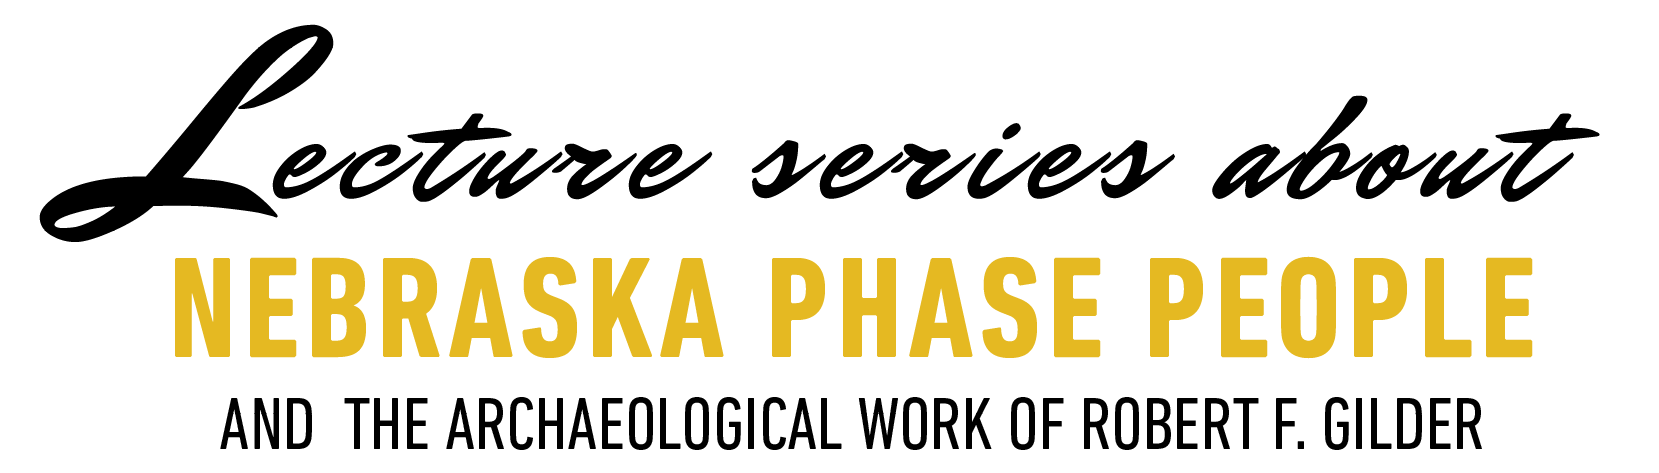 Lecture series about Nebraska Phase People graphic